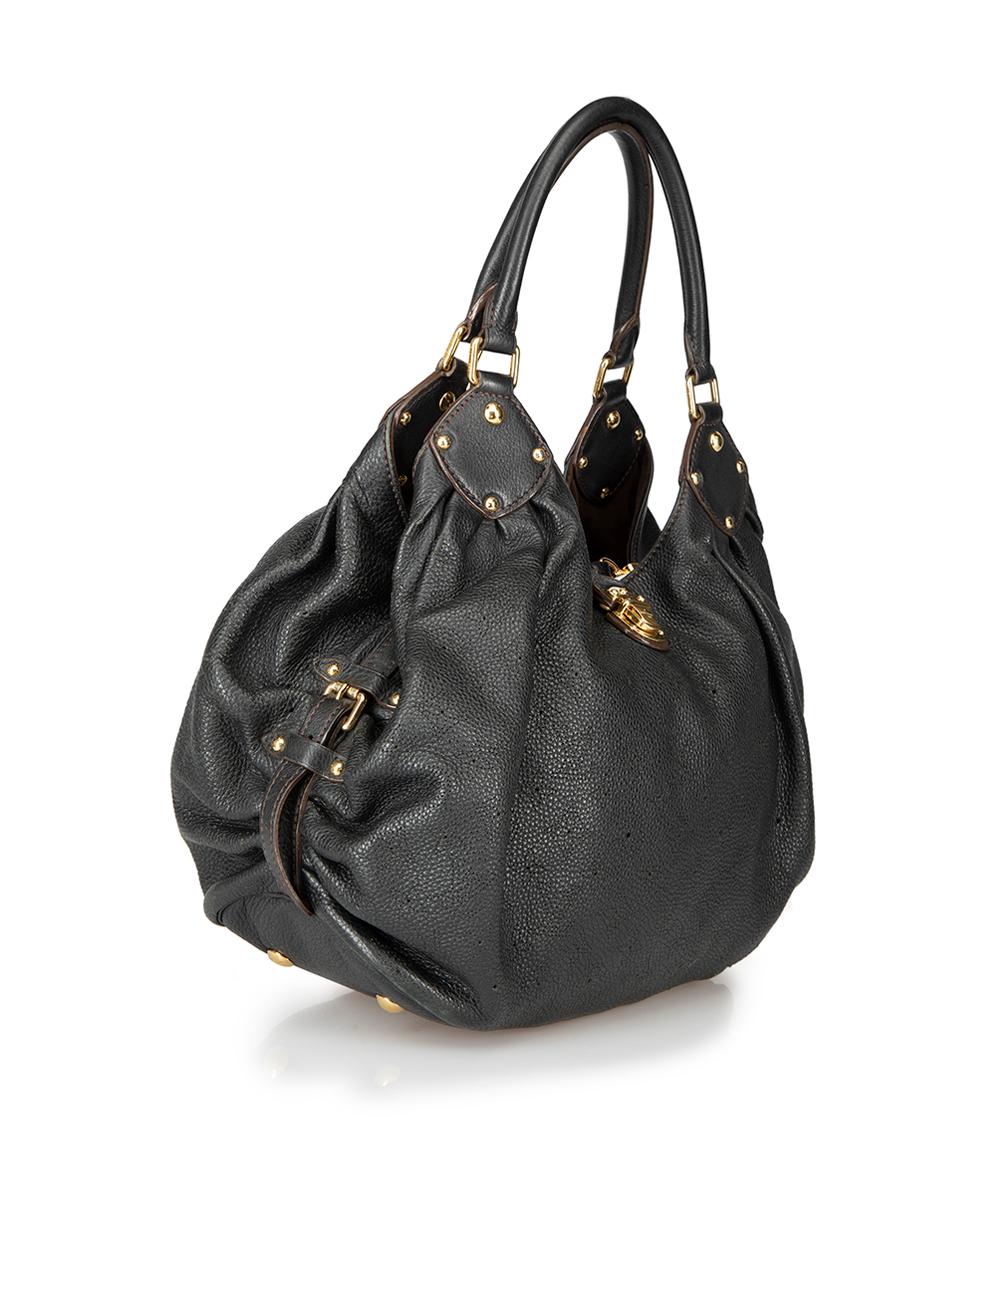 CONDITION is Very good. Minimal wear to bag is evident. Minimal wear to the leather exterior where scuffs can be seen at the bottom of the bag and the leather has worn off. There is also wear to the suede interior where some marks can be seen and